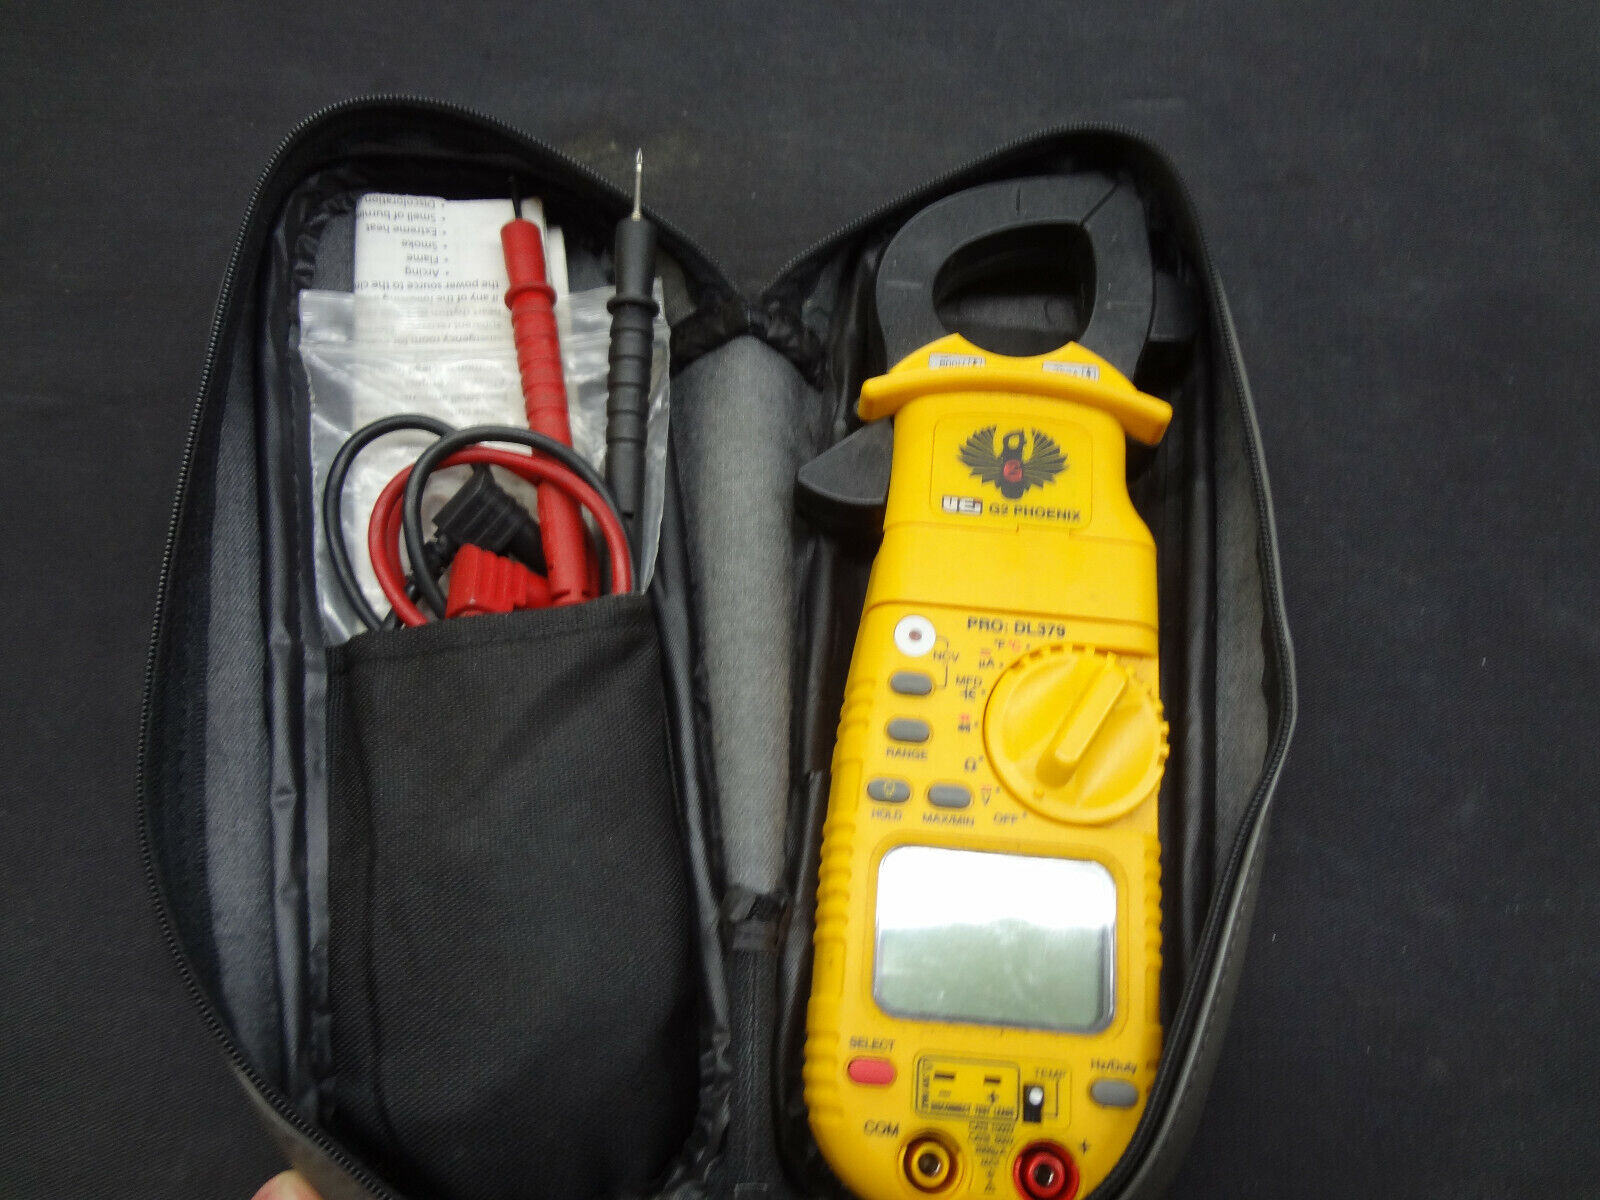 VEI G2 Phoenix DL379 Clamp on Meter with New Temperuture Probe and Leads